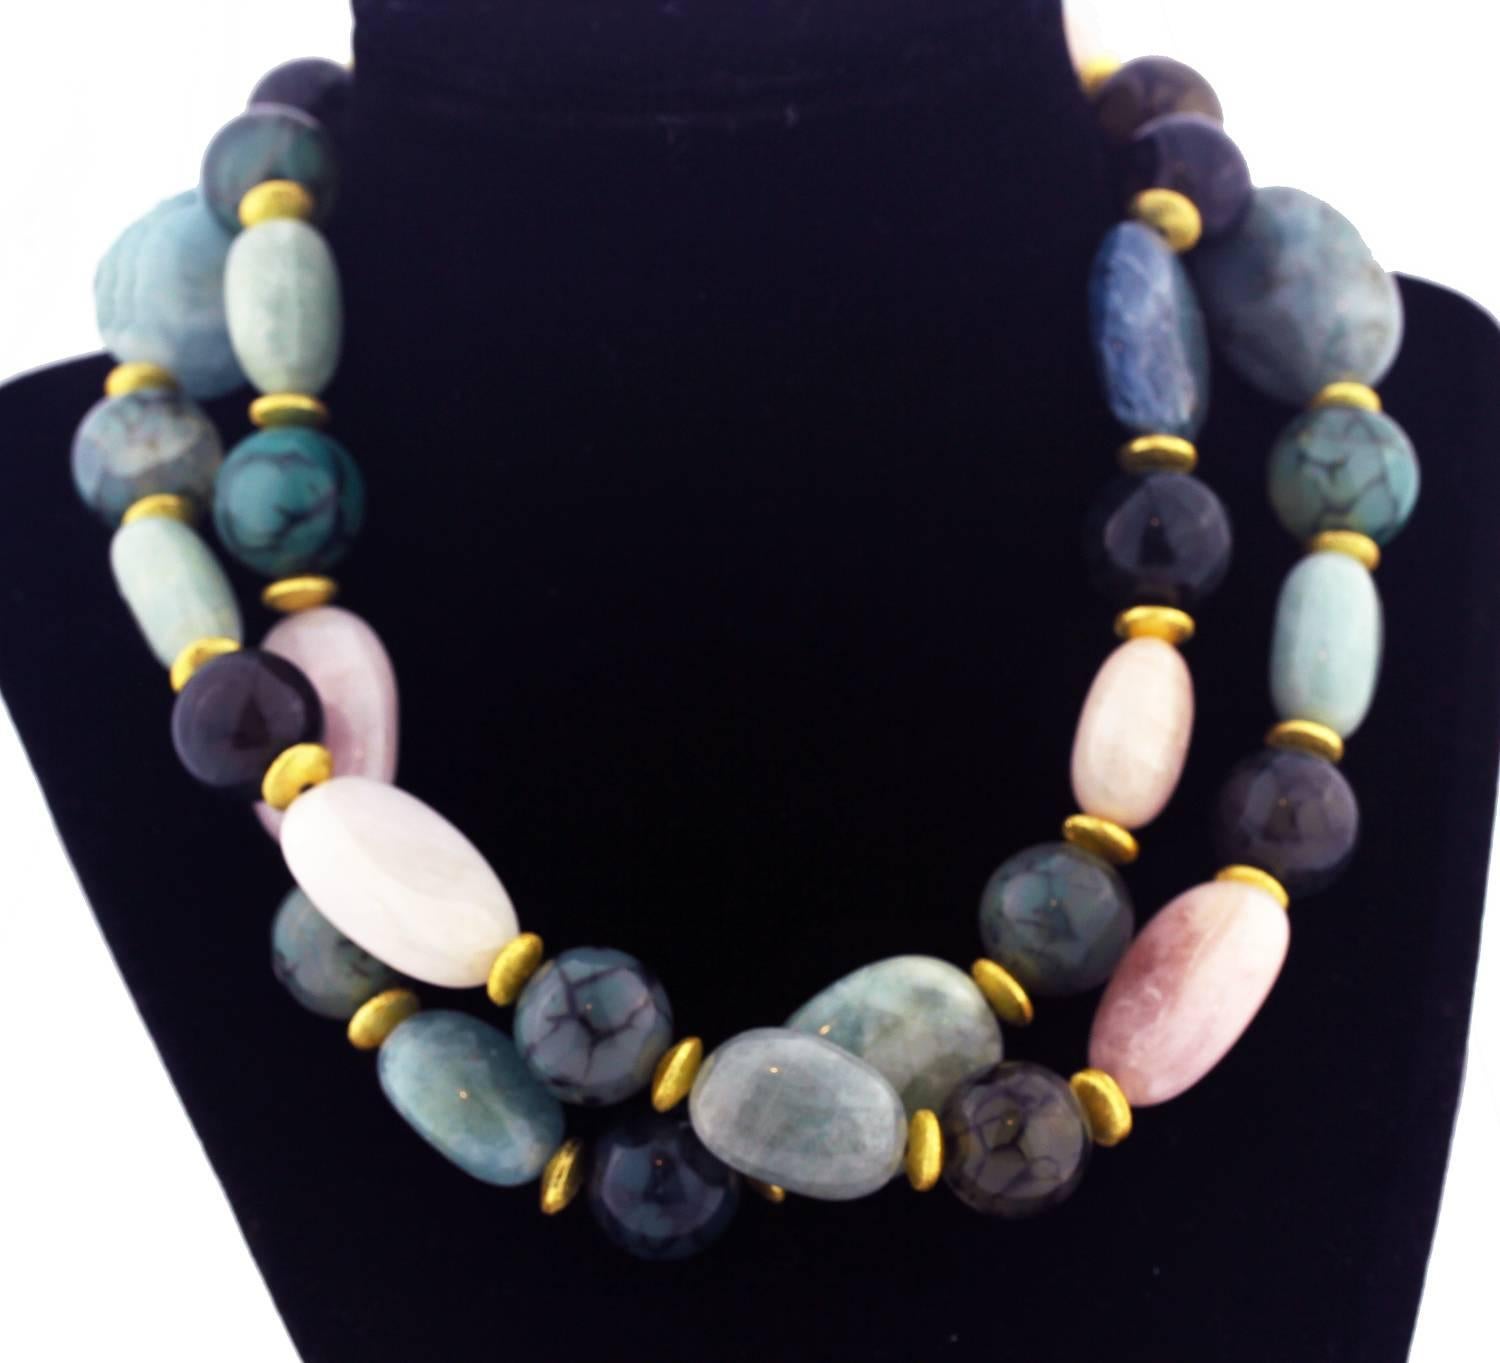 Double strand necklace of Aquamarines, green Beryls, Morganites, and Spider Web Jasper.  The gemstones are all opaque, tumbled, and highly polished .  The color combination of pinks, blues, grays, and greens  is very pleasing and is enhanced with